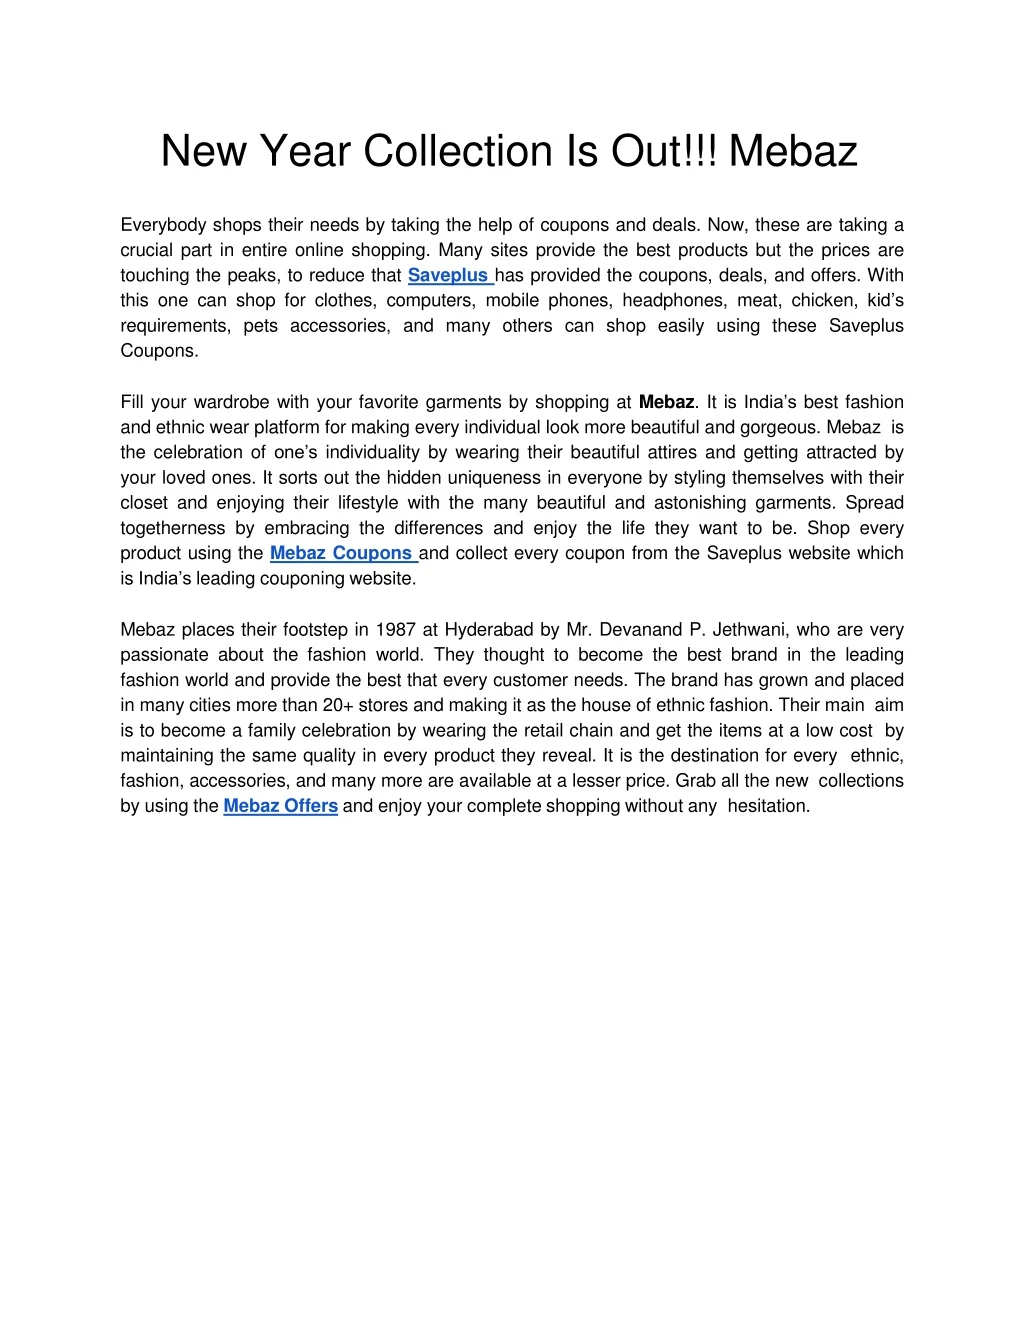 new year collection is out mebaz